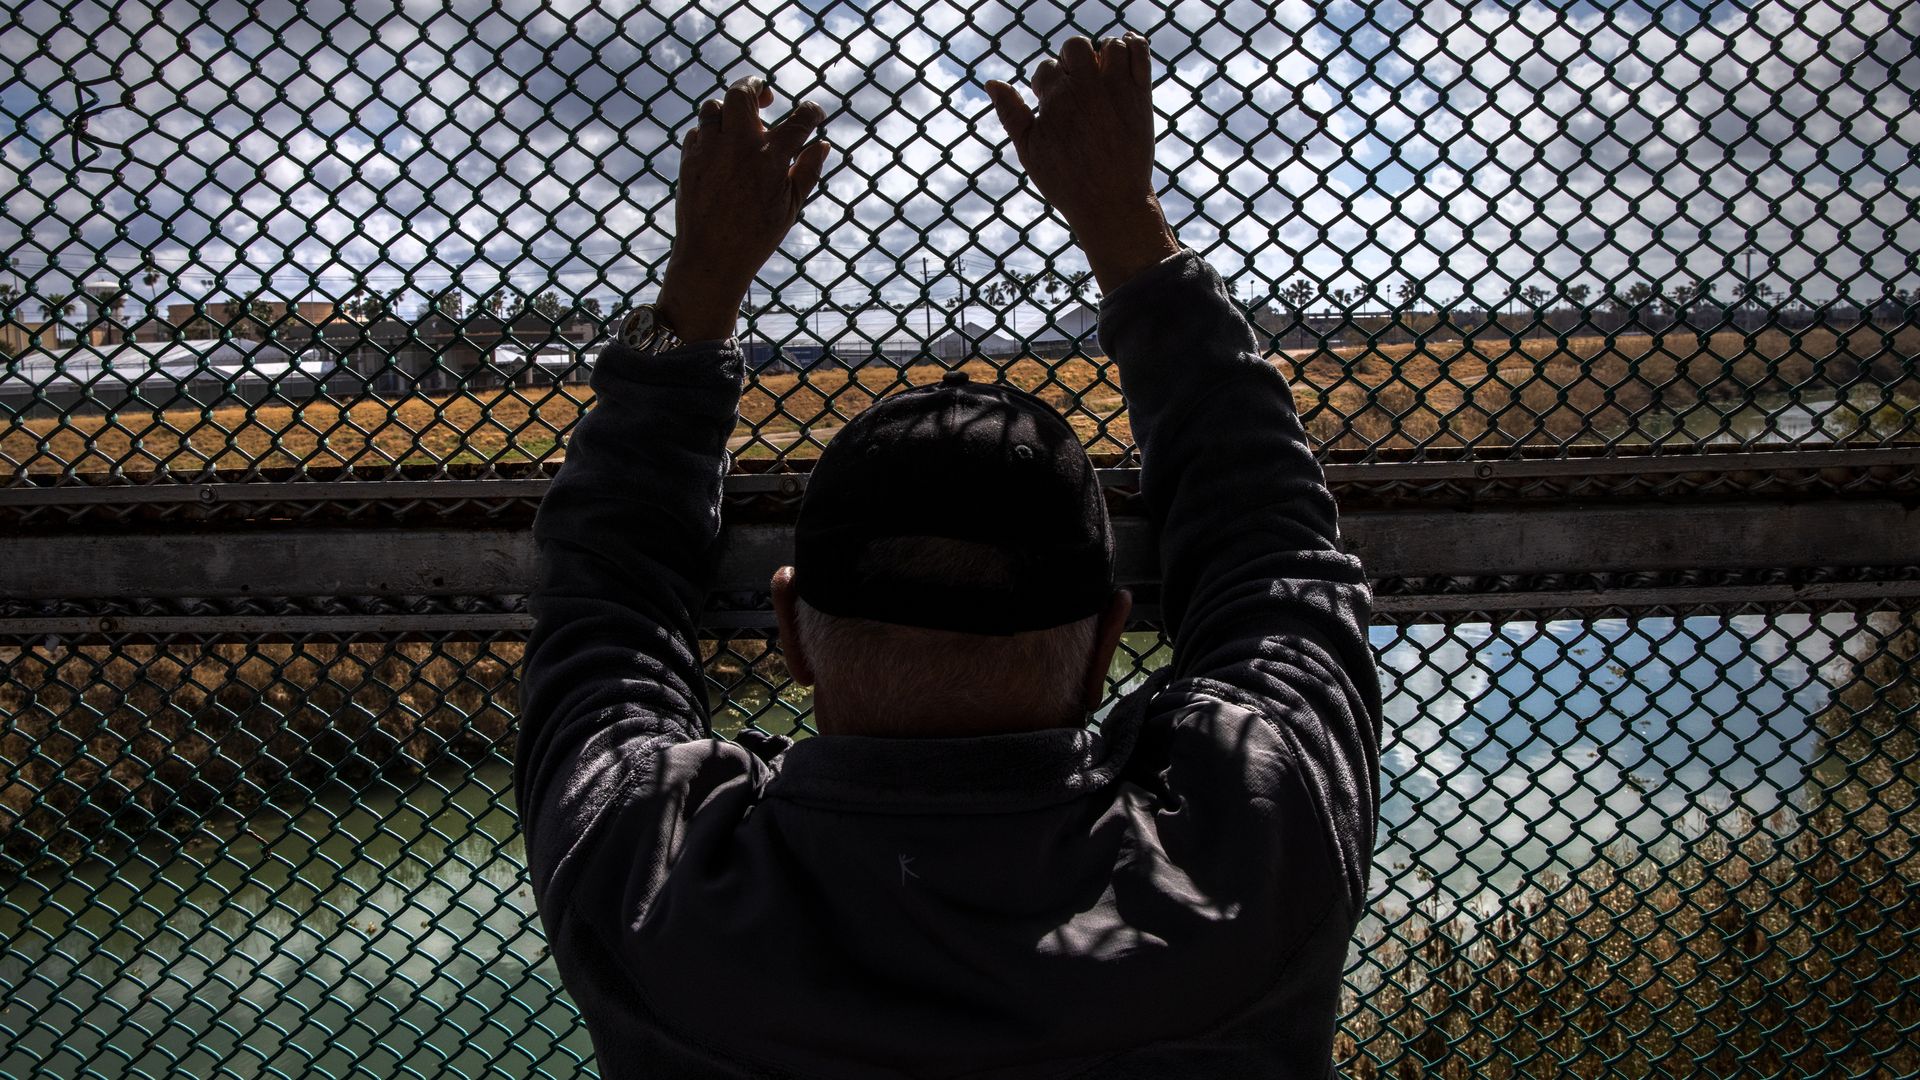 A person holds onto a chain linked fence.